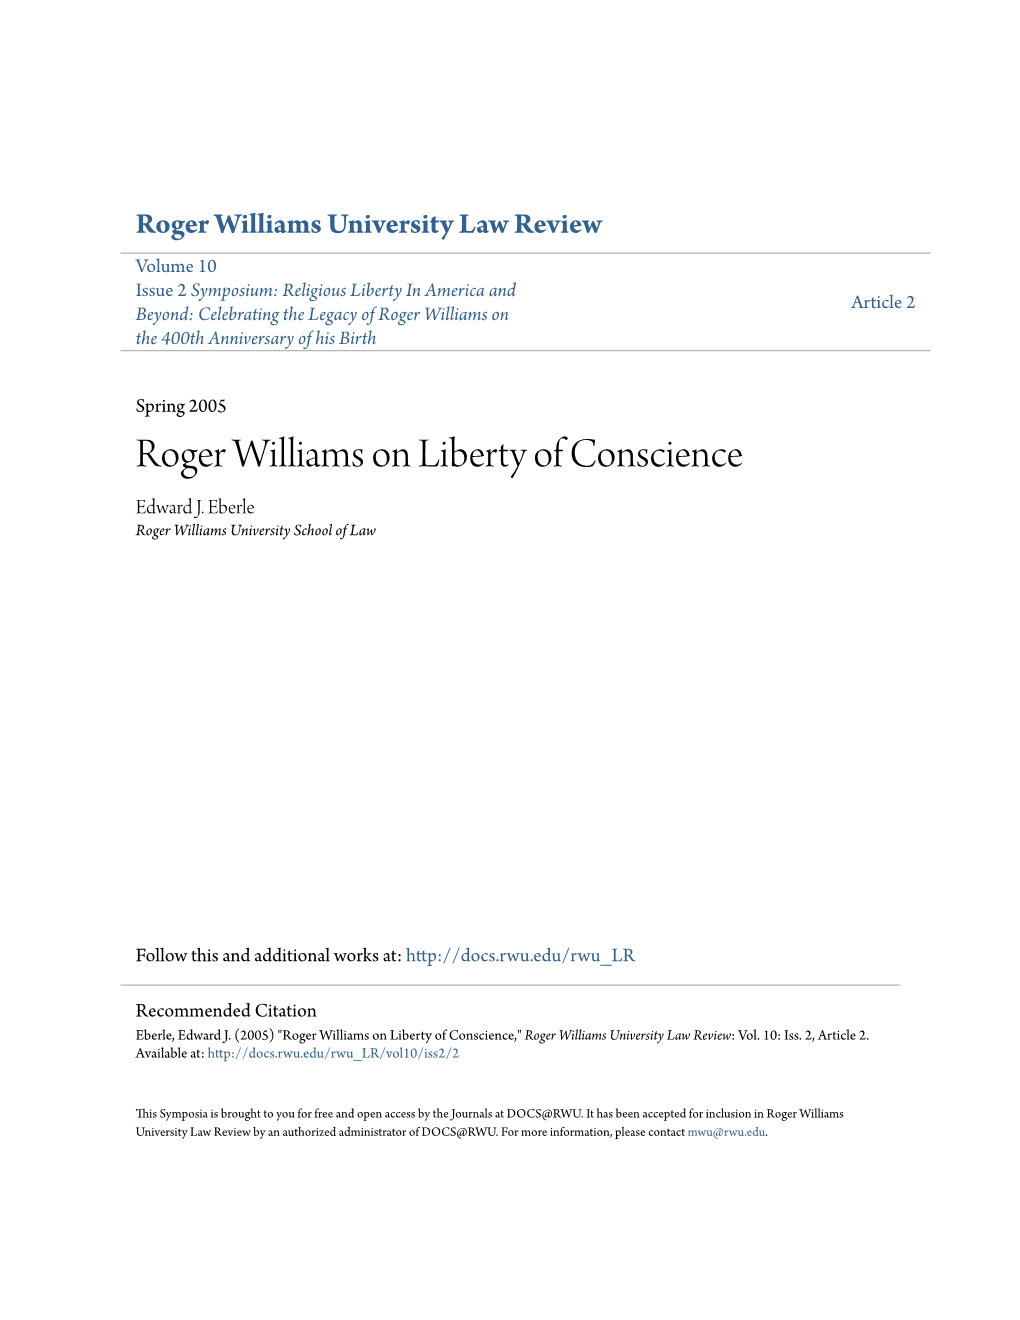 Roger Williams on Liberty of Conscience Edward J